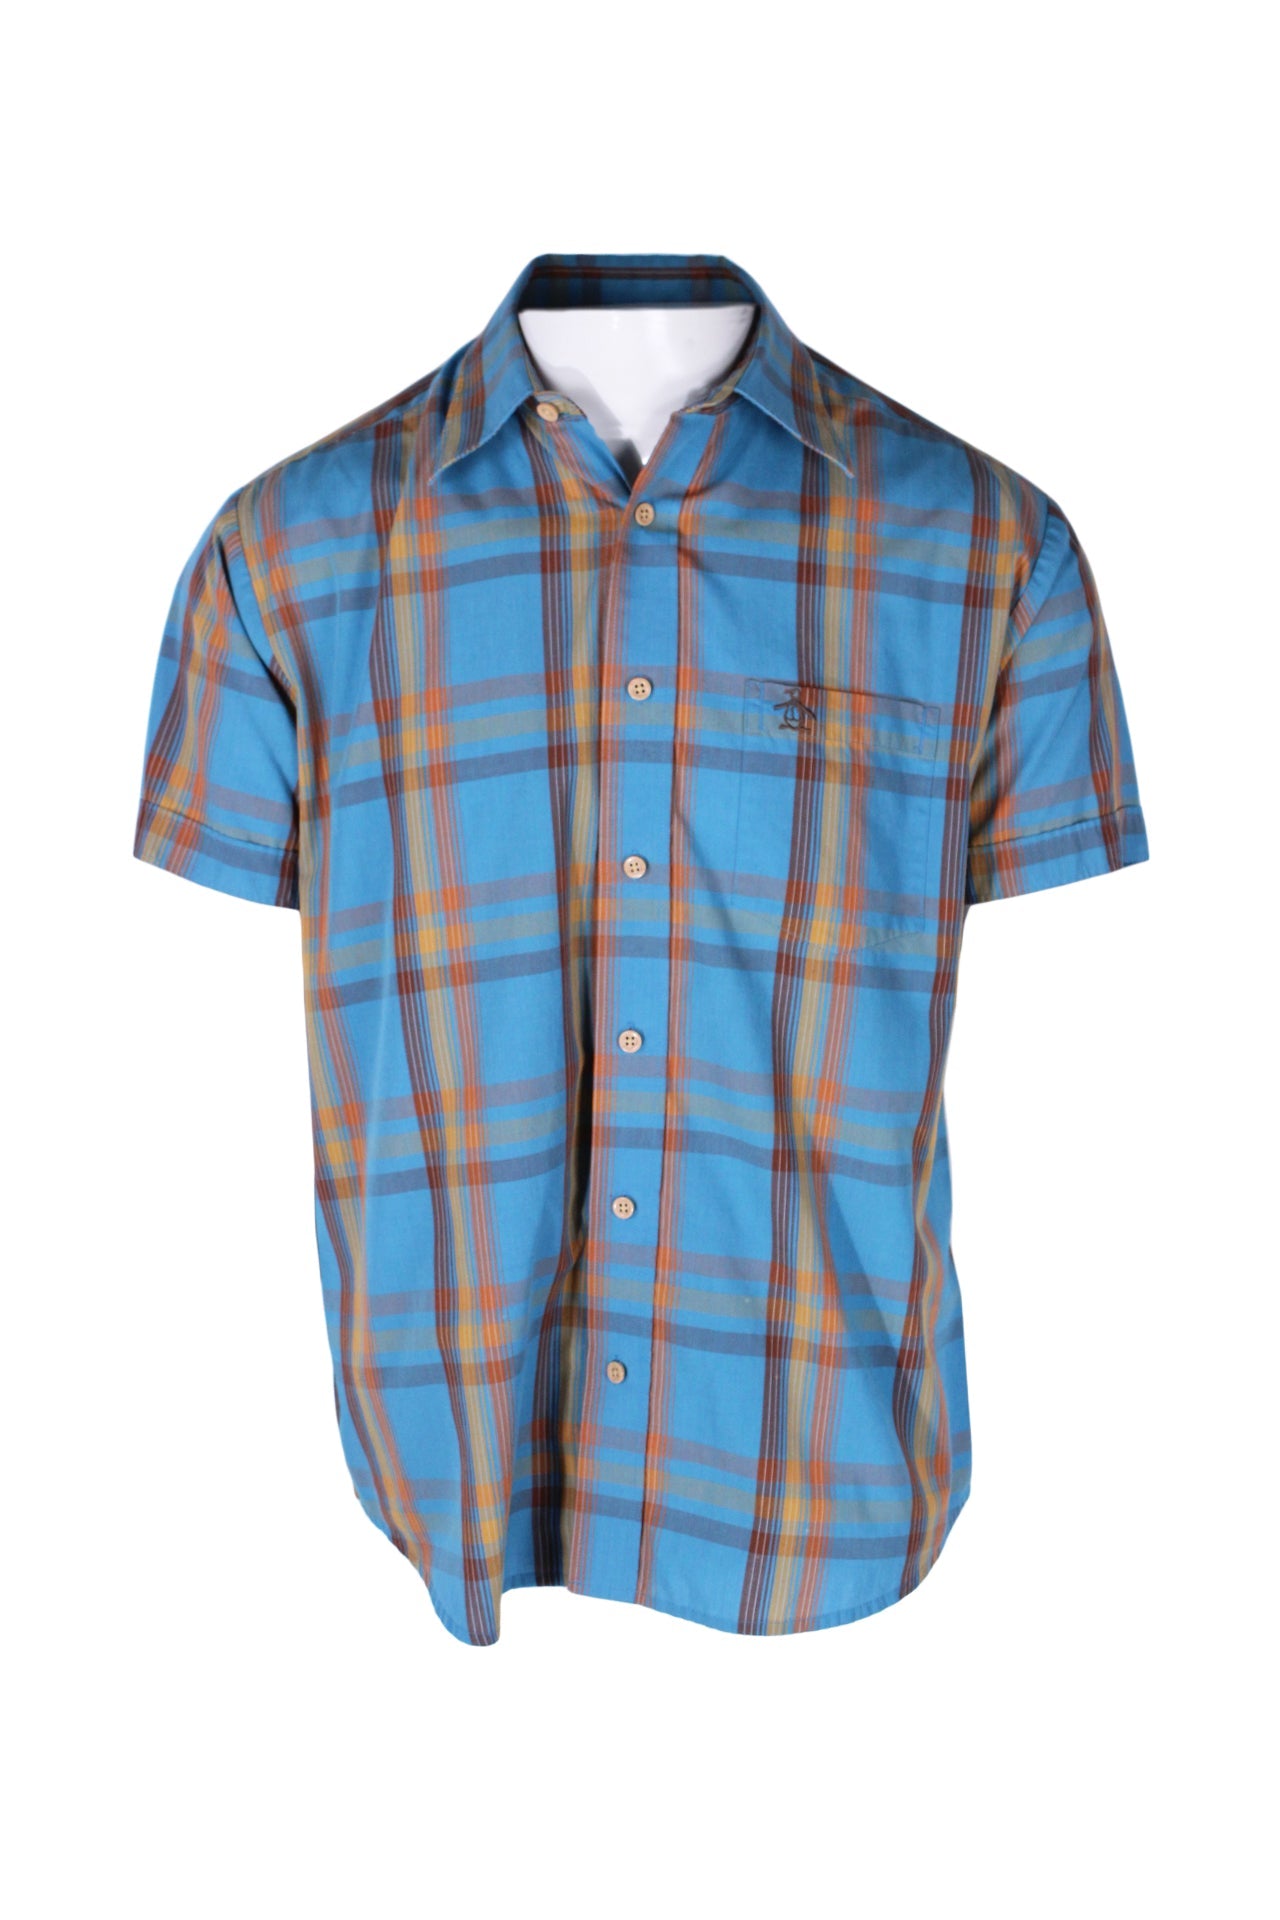 front angle penguin blue/multicolor short sleeve plaid shirt on masculine mannequin torso featuring chest patch pocket with embroidered penguin logo, front button closure, and pointed collar.